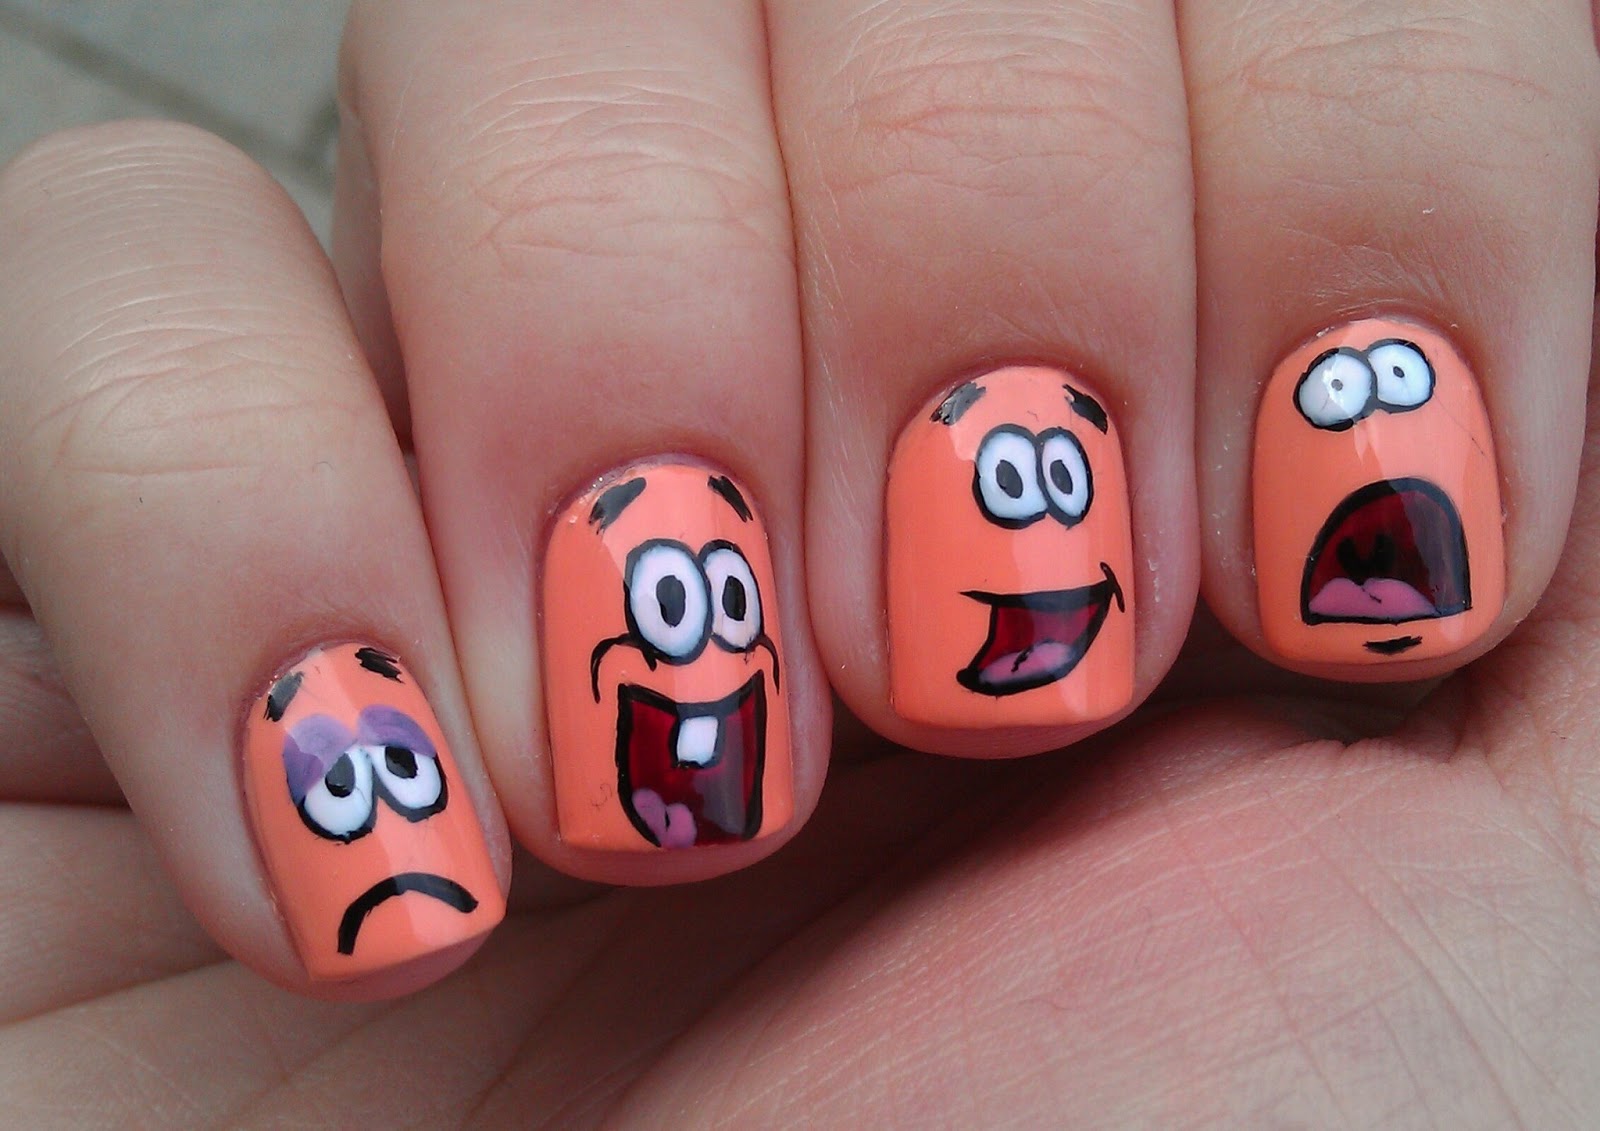 1. "Hilarious Nail Art Fails That Will Make You Laugh" - wide 3